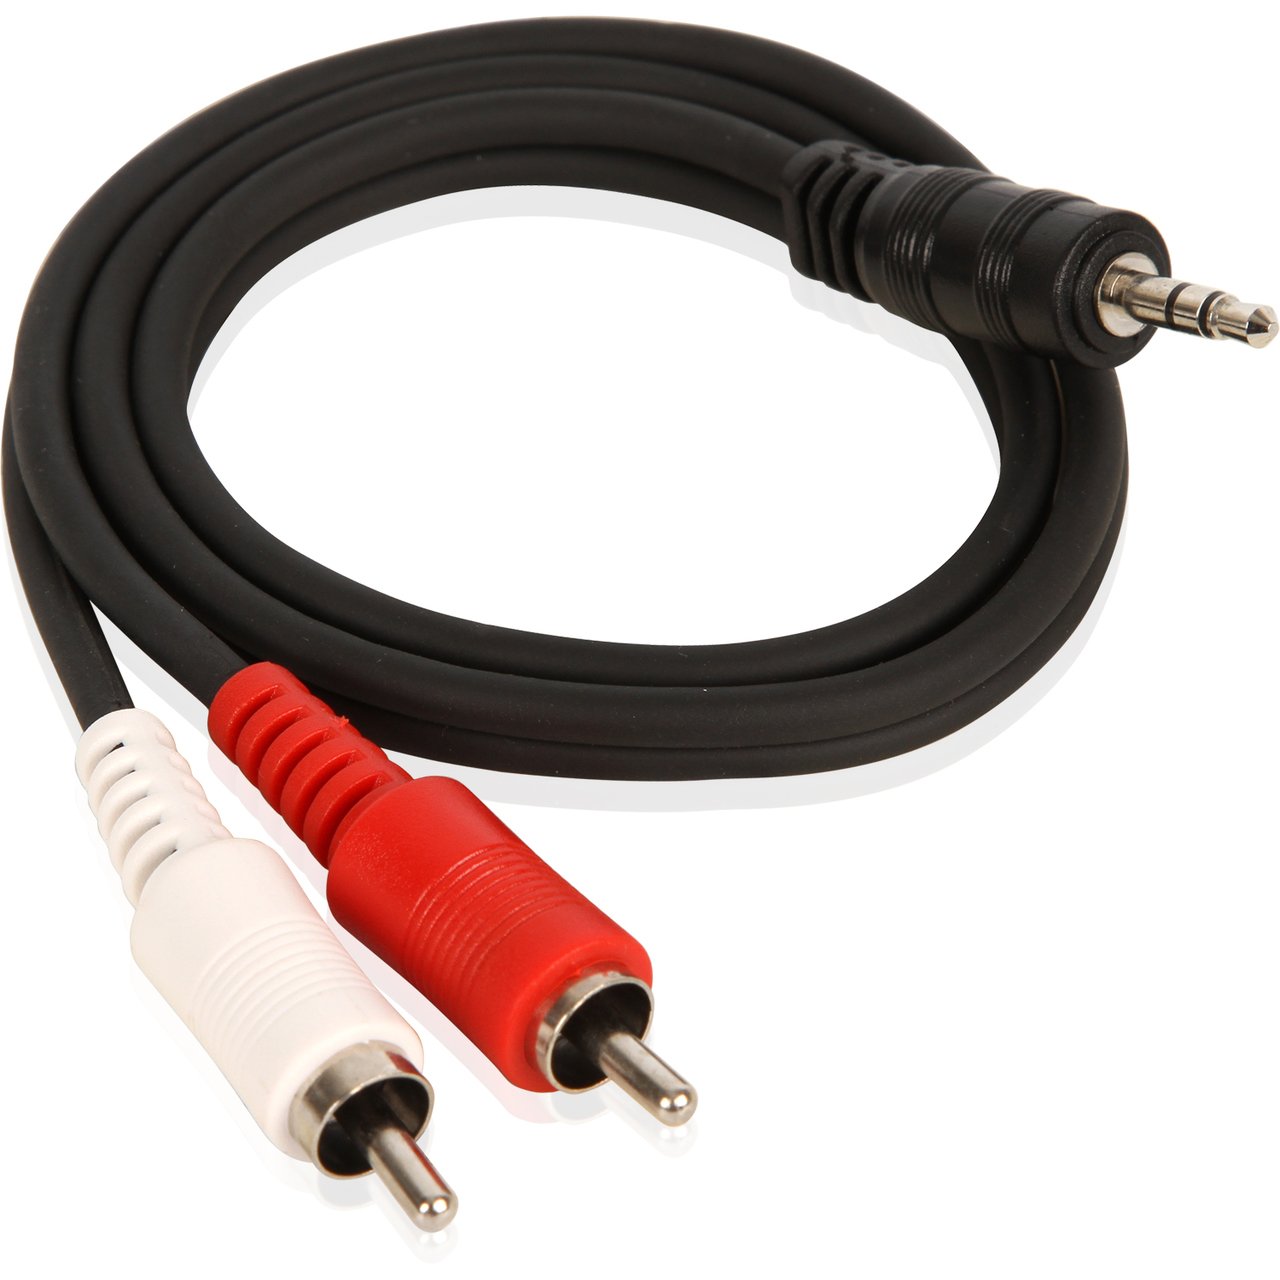 Where To Buy Audio Cable With Headphone Jack